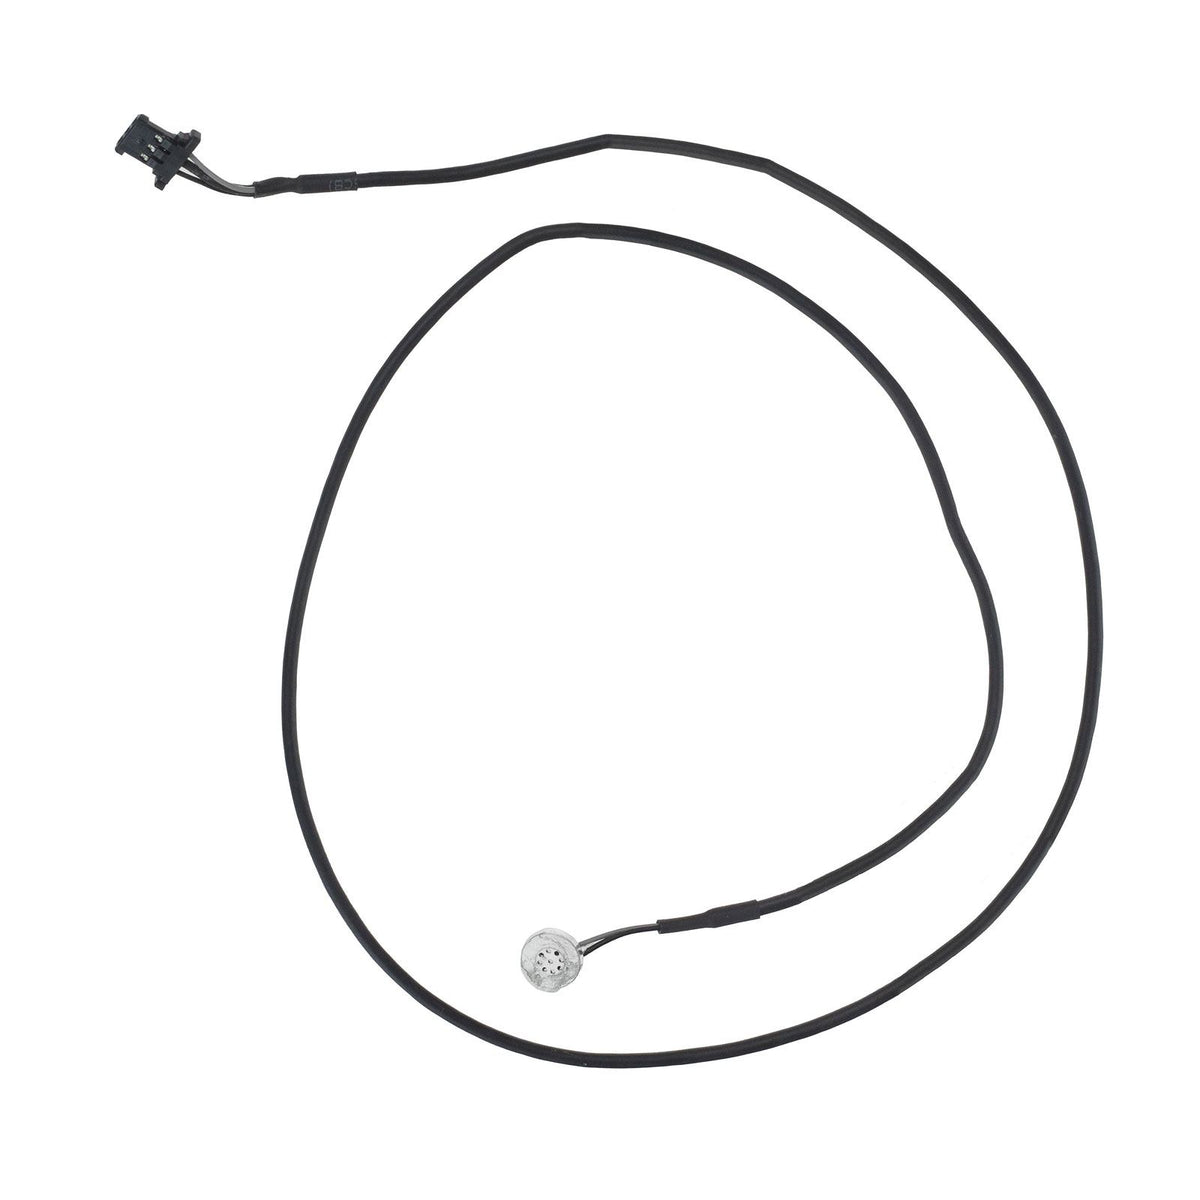 MICROPHONE CABLE  FOR IMAC 21.5" A1311 (MID 2011 - LATE 2011)